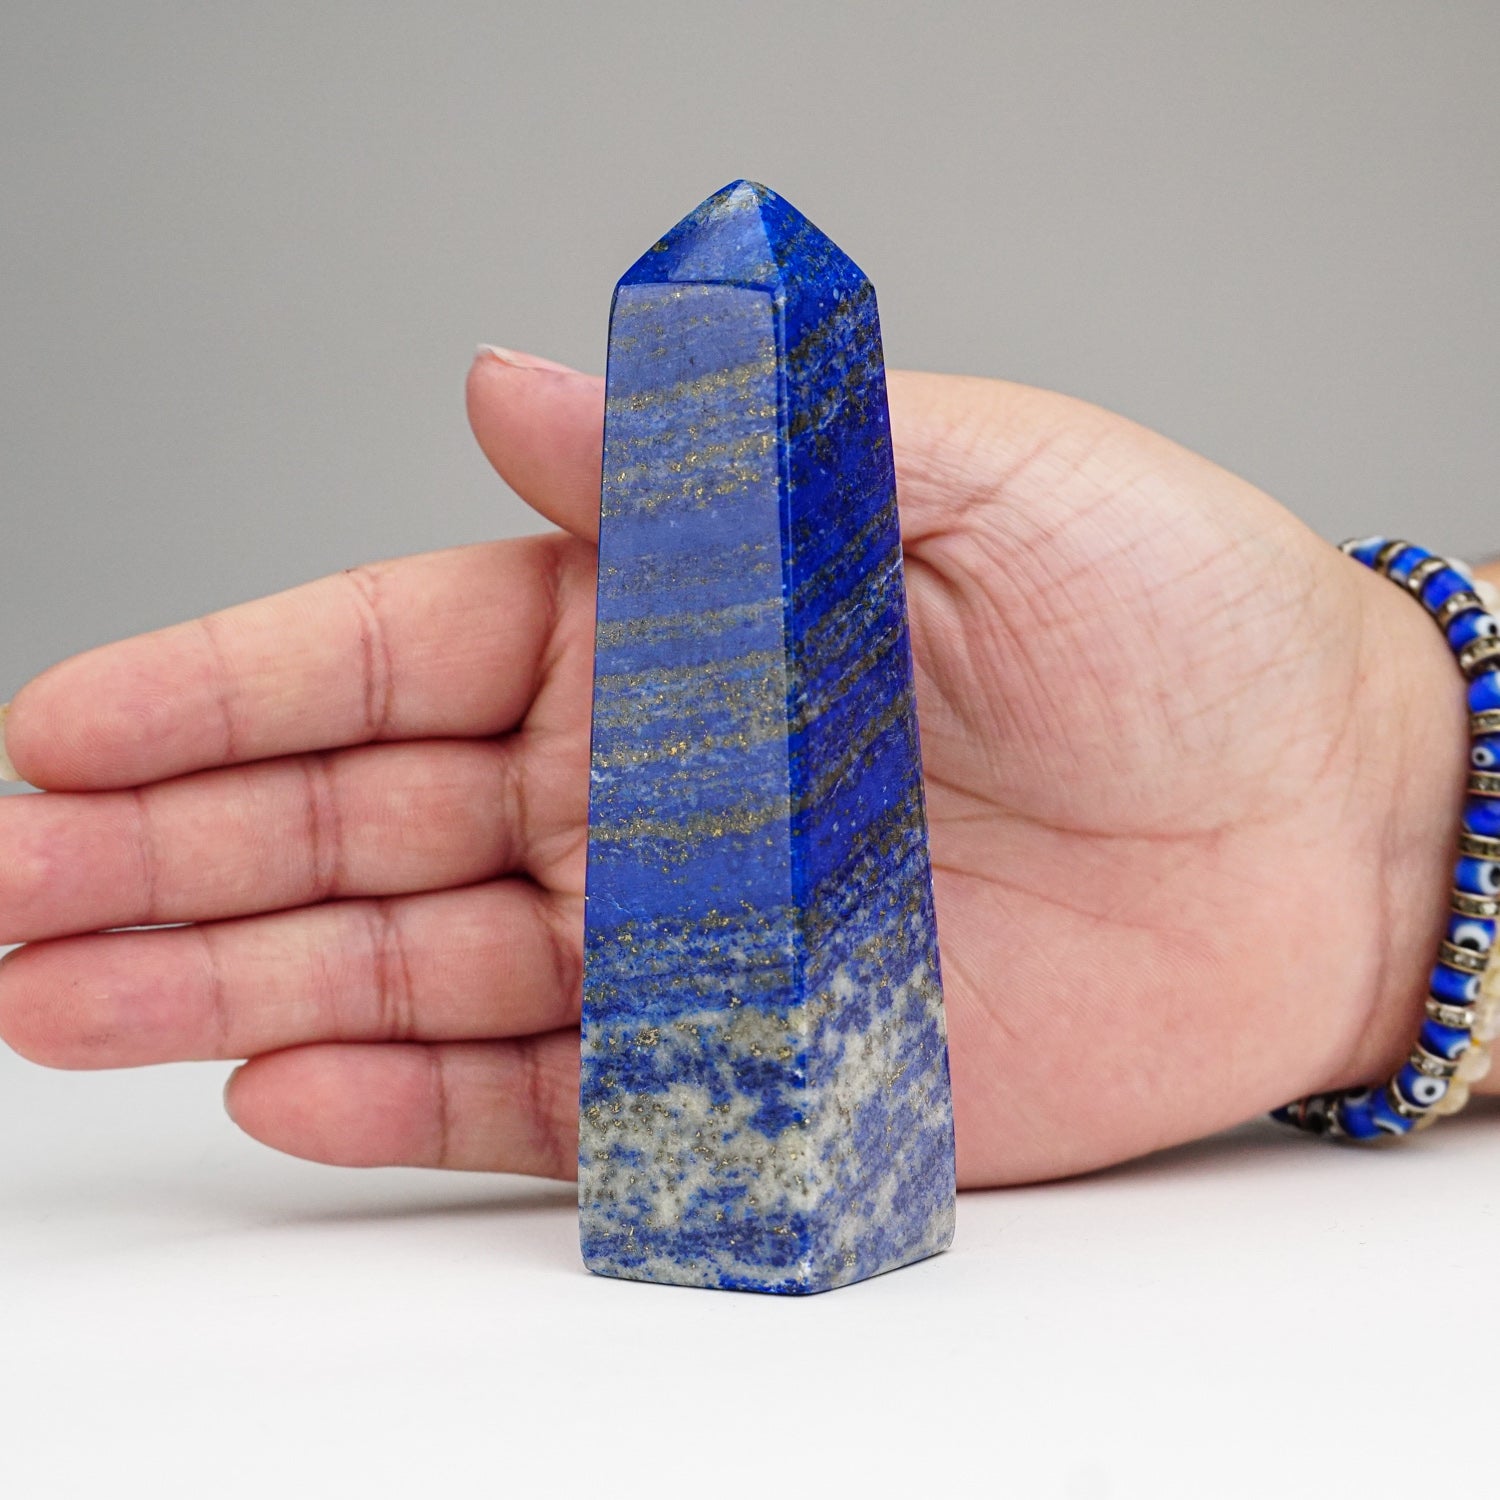 Polished Lapis Lazuli Point from Afghanistan (221.2 grams)